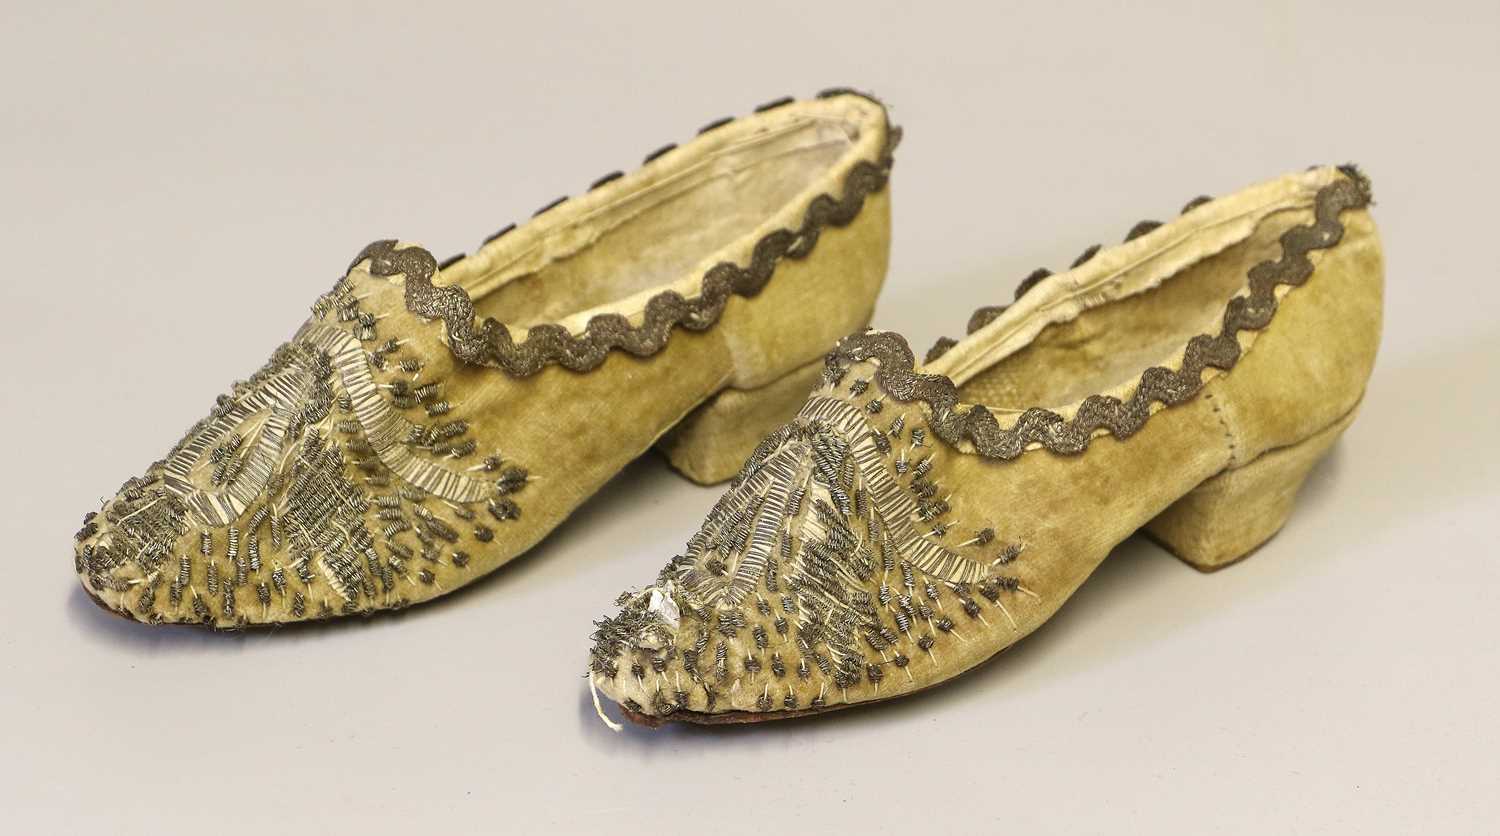 Circa 1840 Pair of Childs Cream Velvet Heeled Shoes, with silver embroidery, appliqué and ricrac